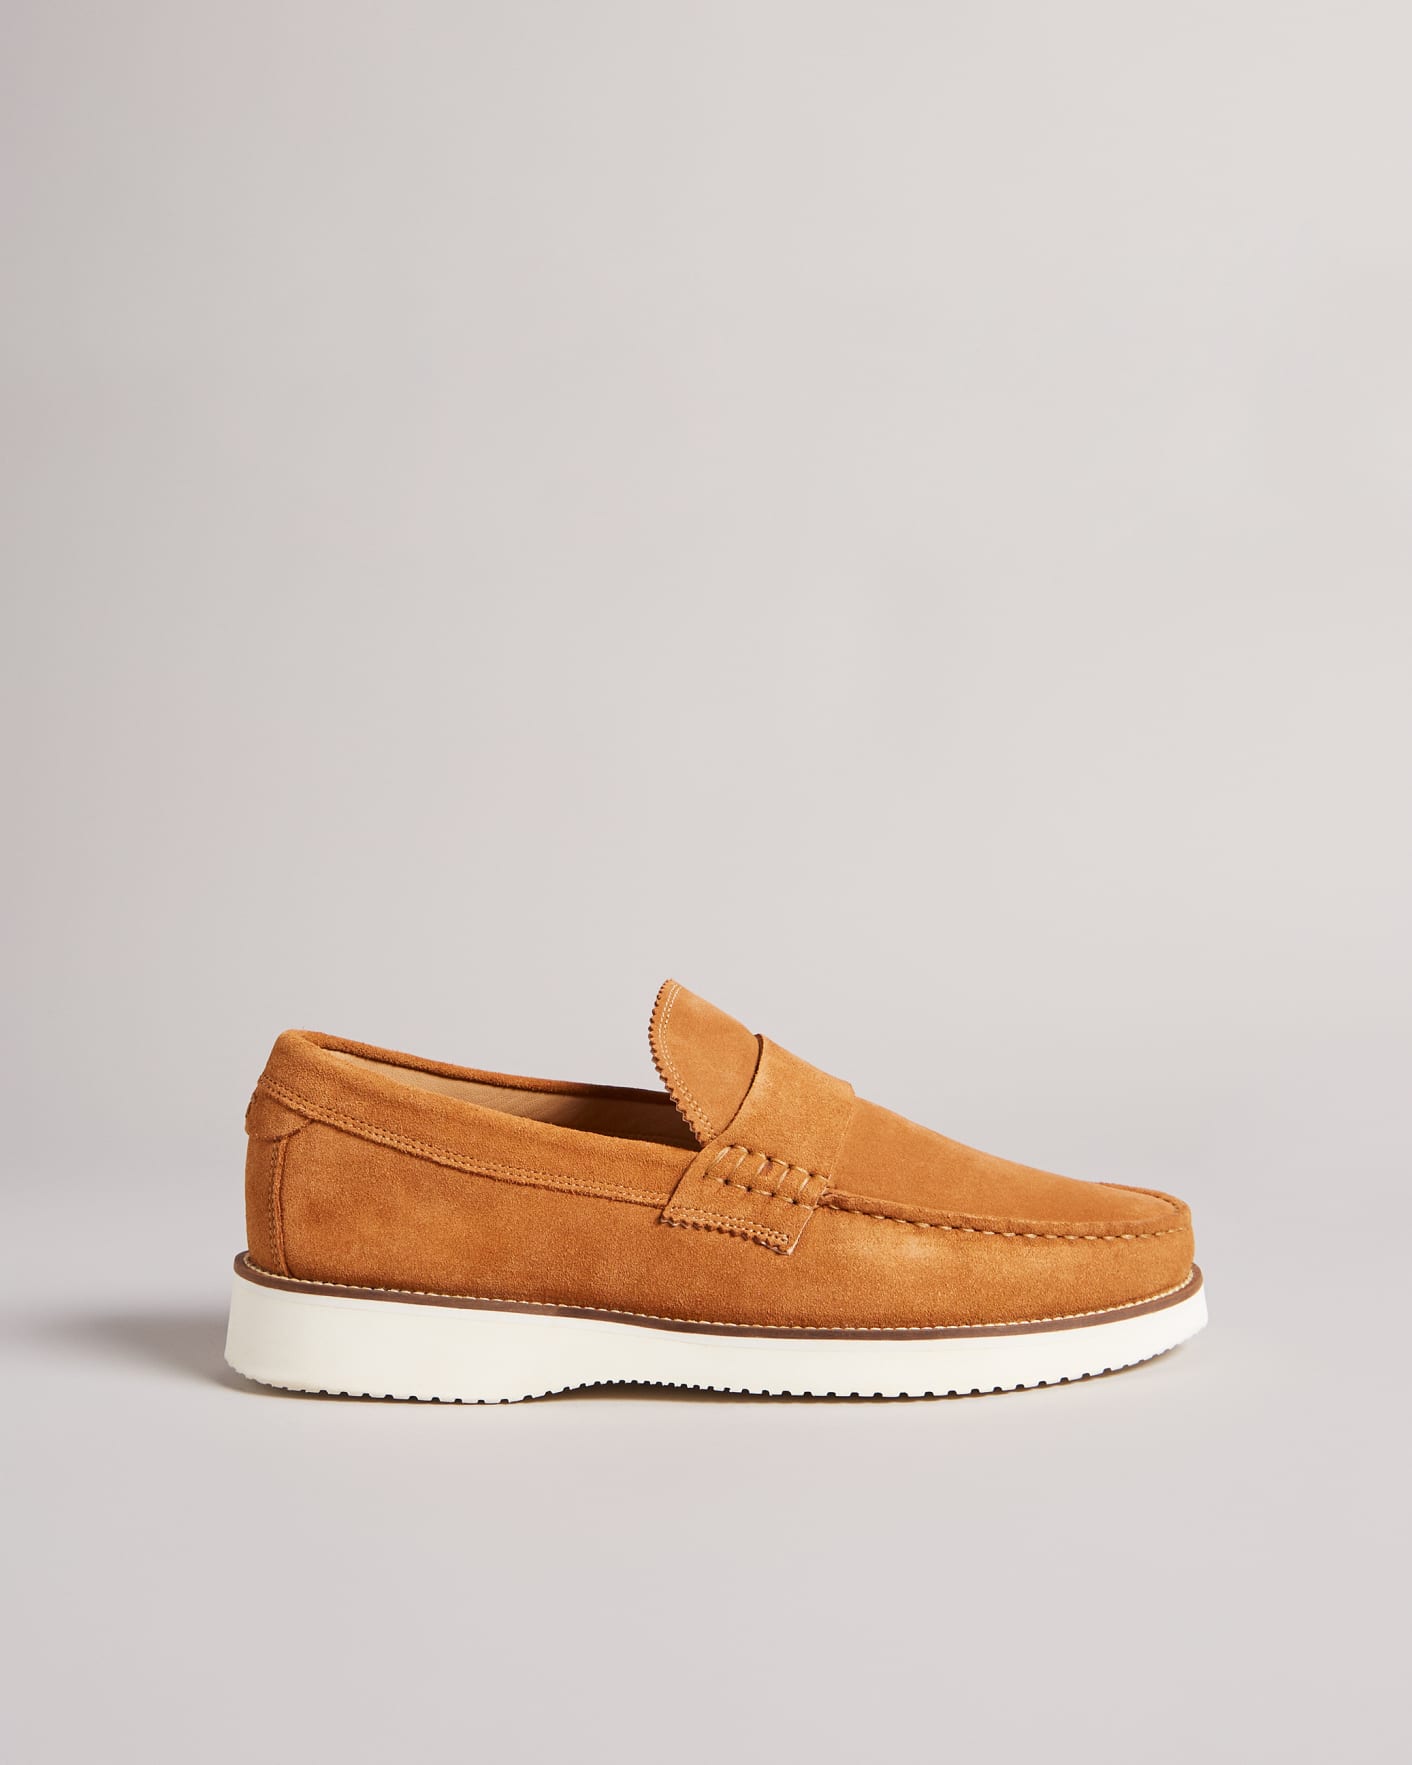 Isaac Suede Loafers in Tan